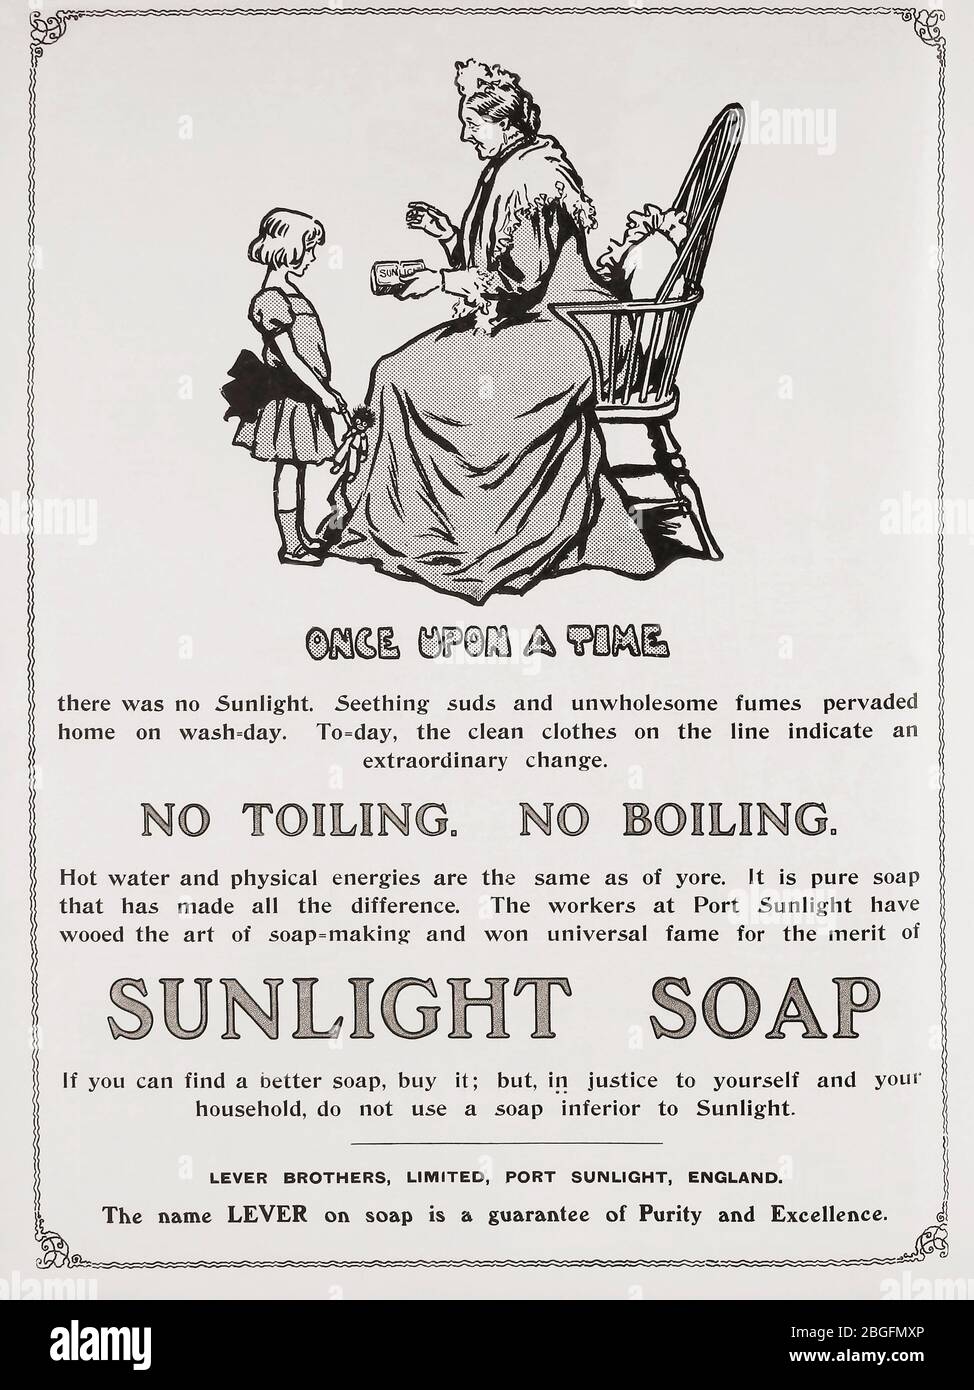 Advertisement for Sunlight Soap in the March 1907 edition of The Graphic, a weekly illustrated newspaper, published in London from 1869 to 1932. Stock Photo